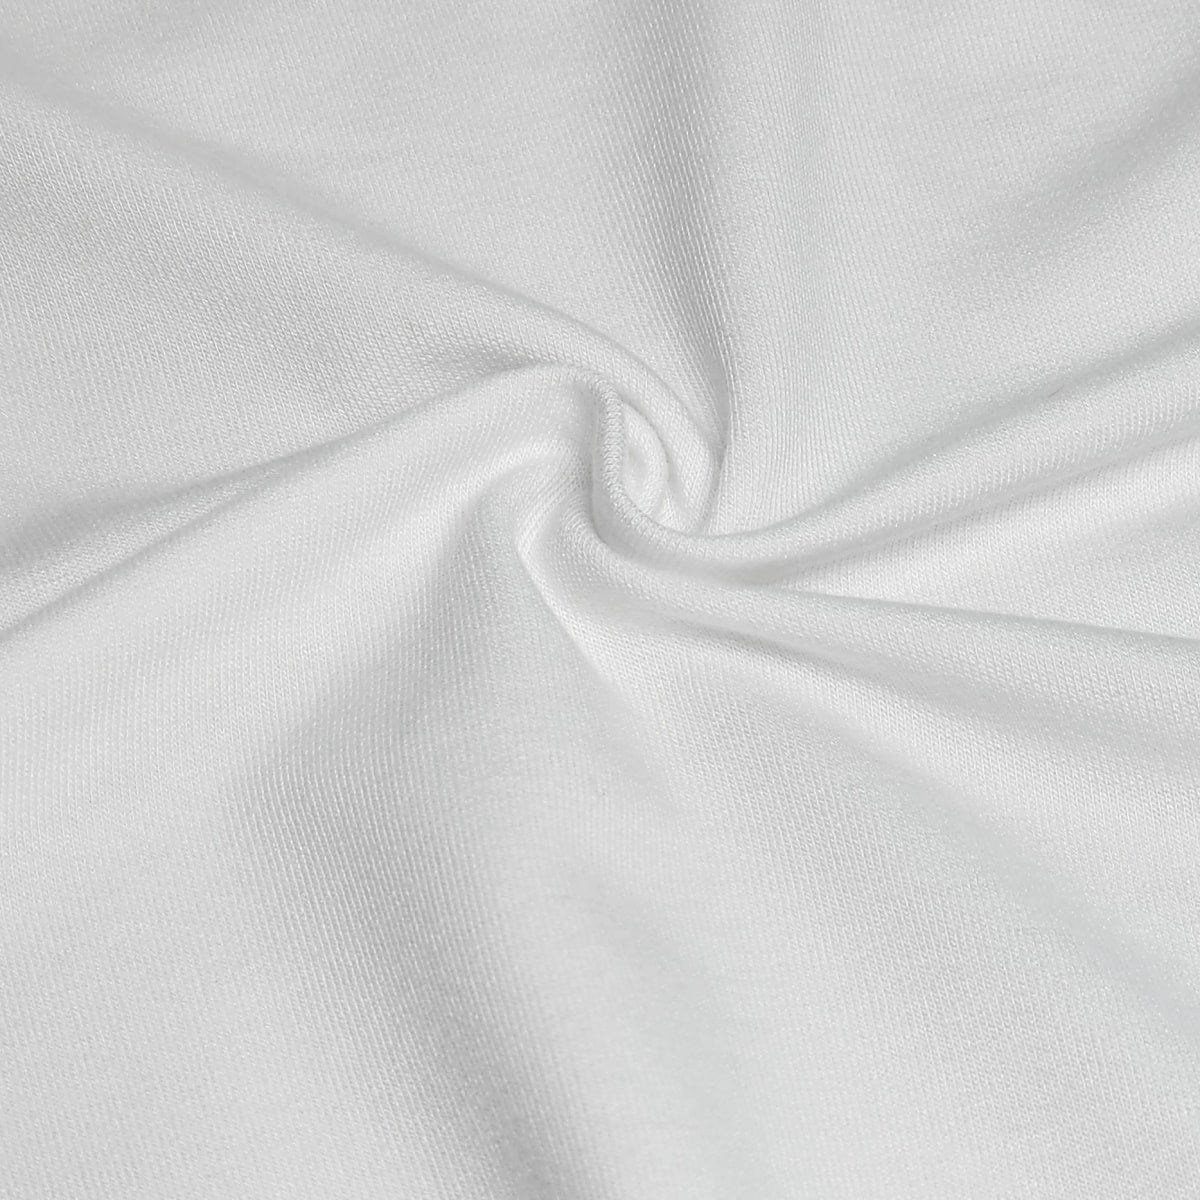 OFF WHITE - FRENCH TERRY WITH ELASTANE VISCOSE FROM LENZING™ ECOVERO™  VISCOSE FIBRES 260g